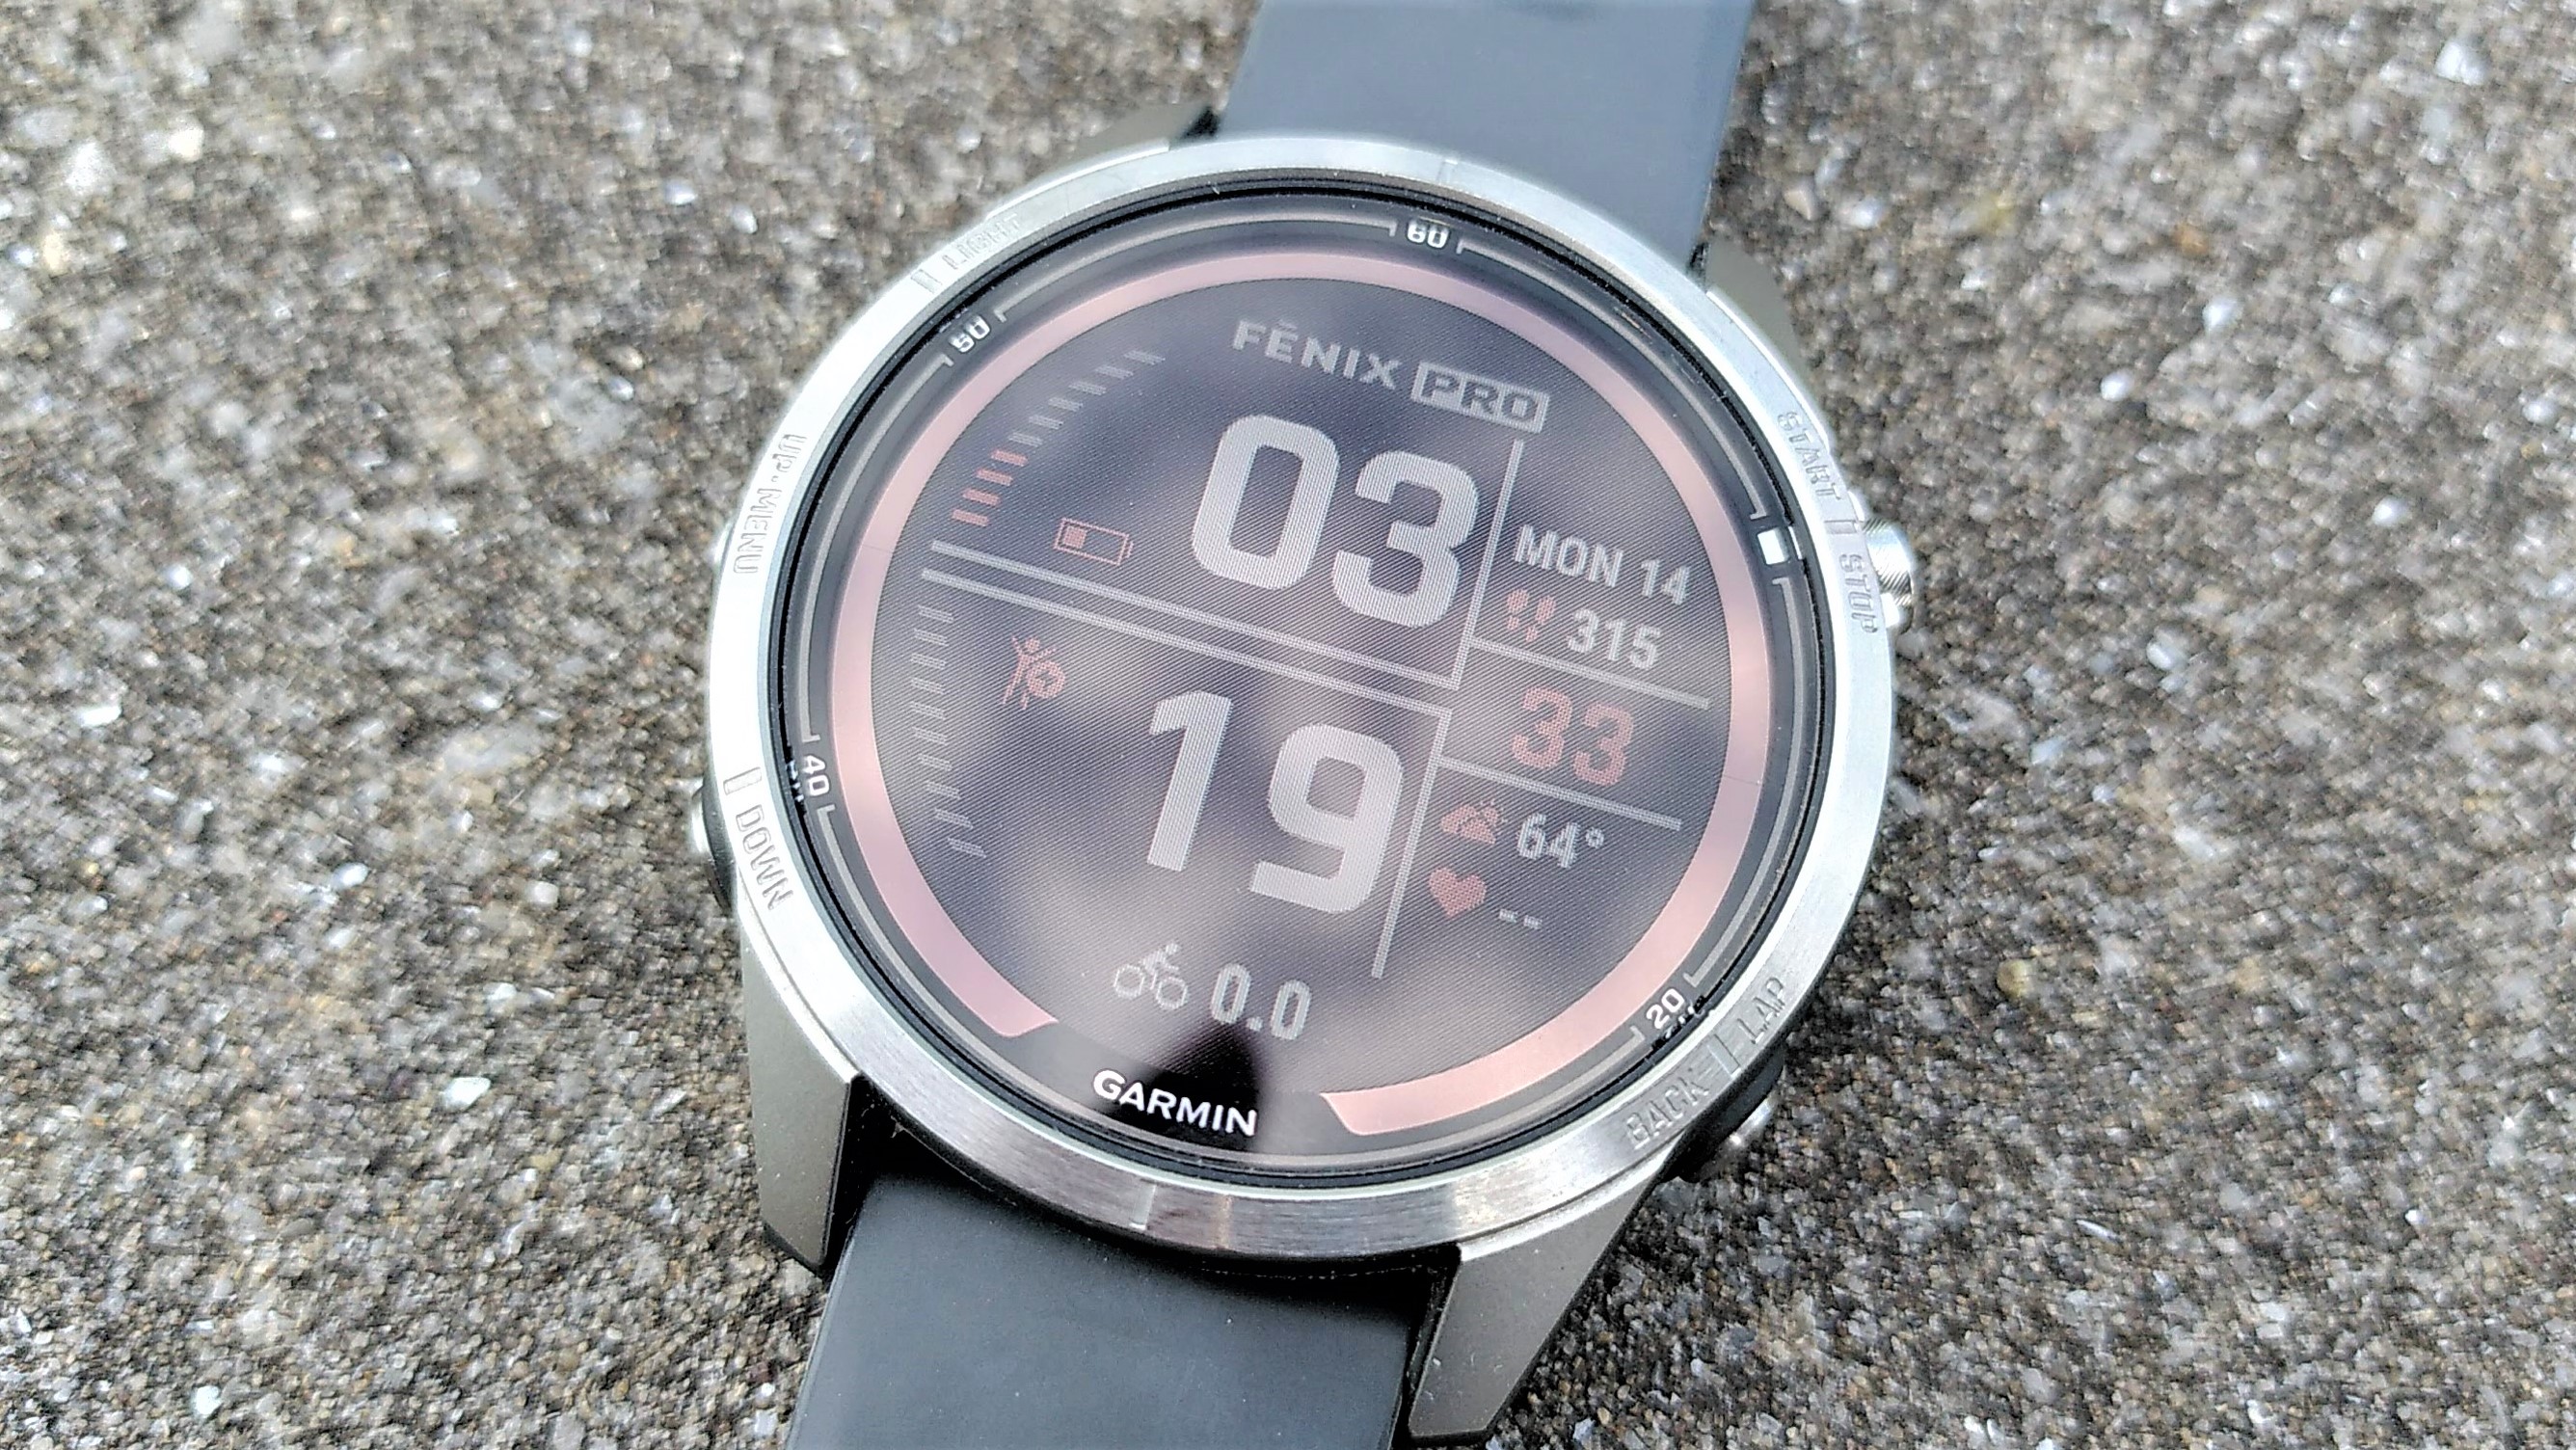 Nothing Watch (1) Rendered After Rumors About Nothing Smartwatch Appear  Online